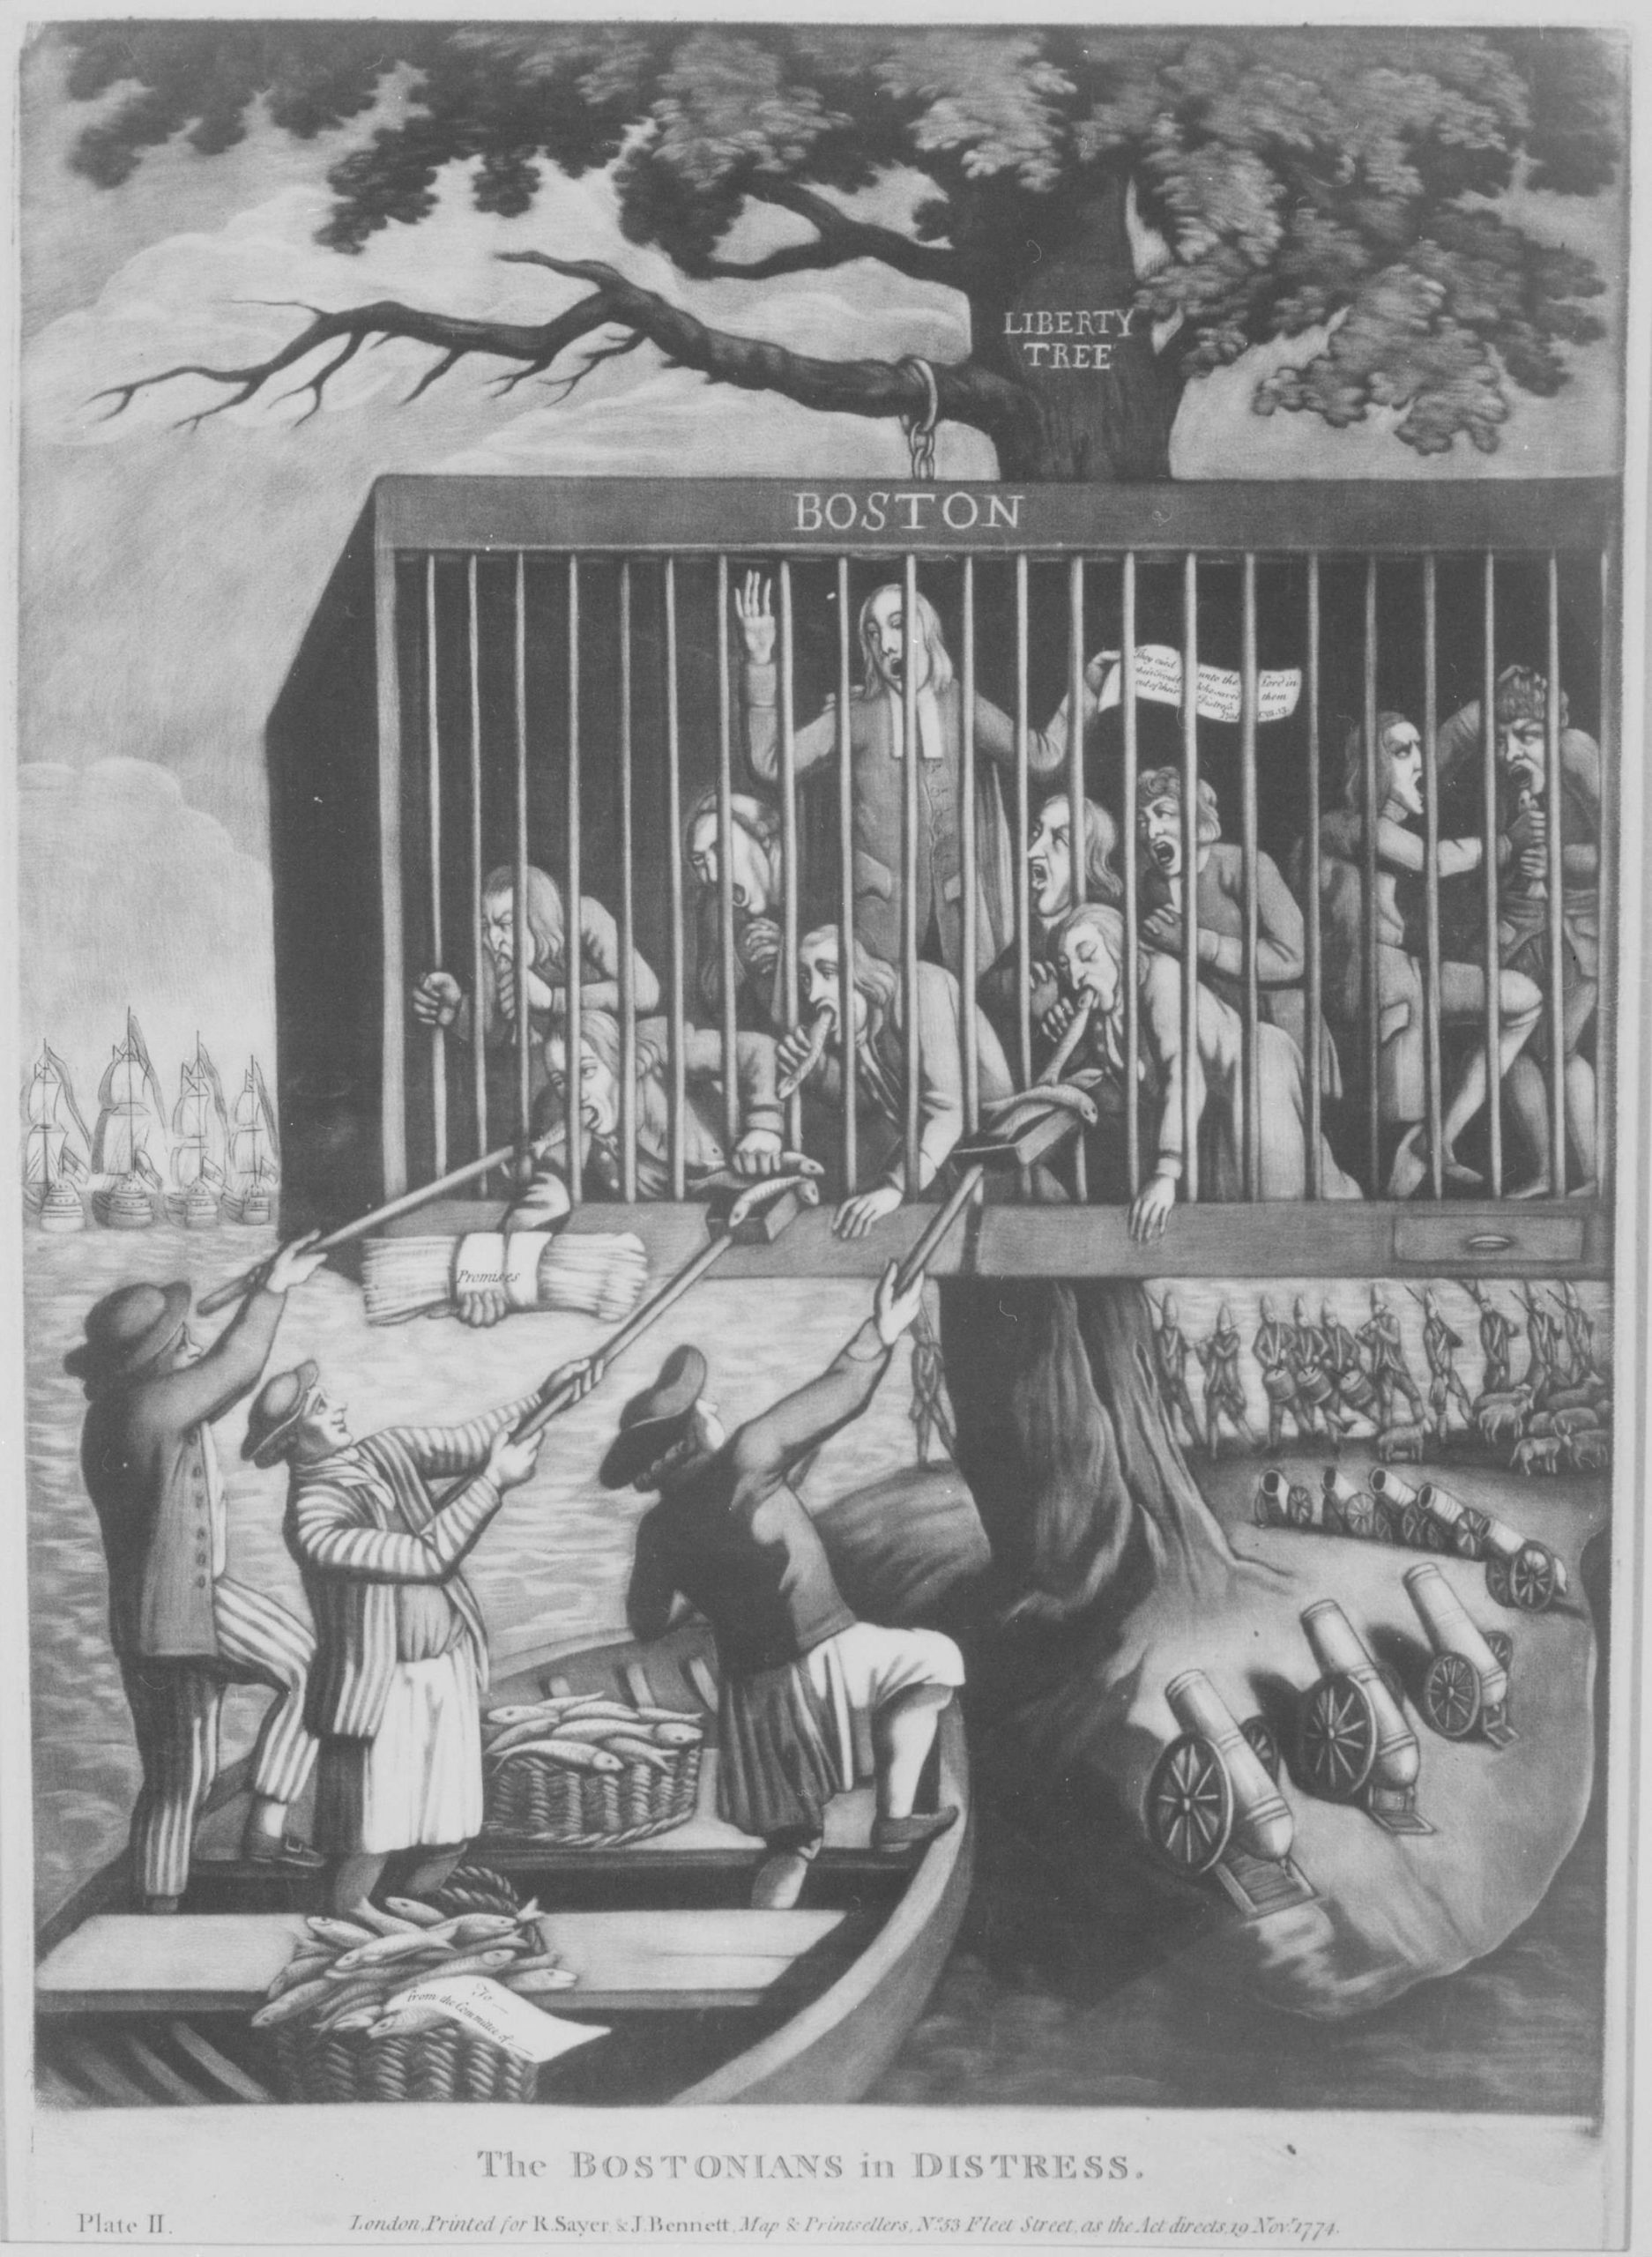 A political cartoon showing bostonians caged and tied to the liberty tree